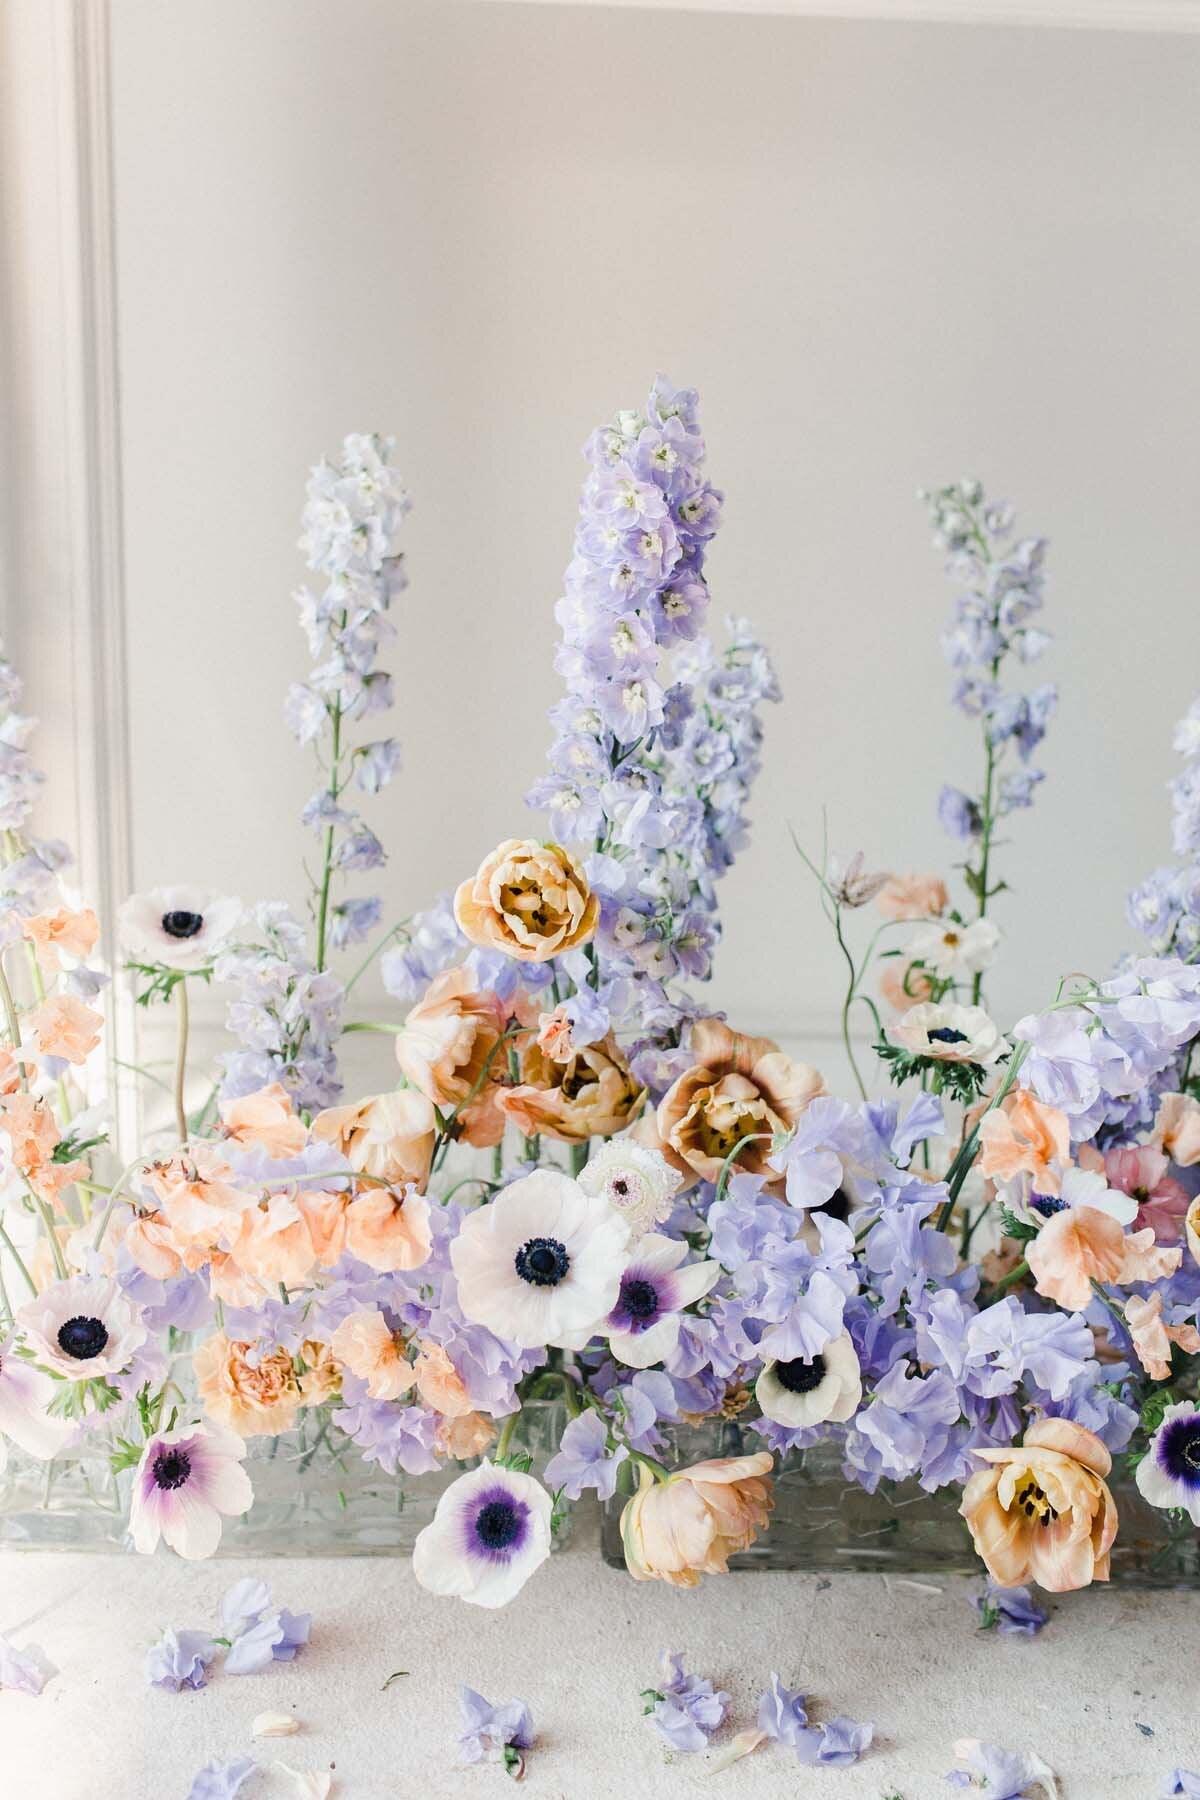 A pastel flower installment with tall periwinkle delphinium, white anemones, and peach roses